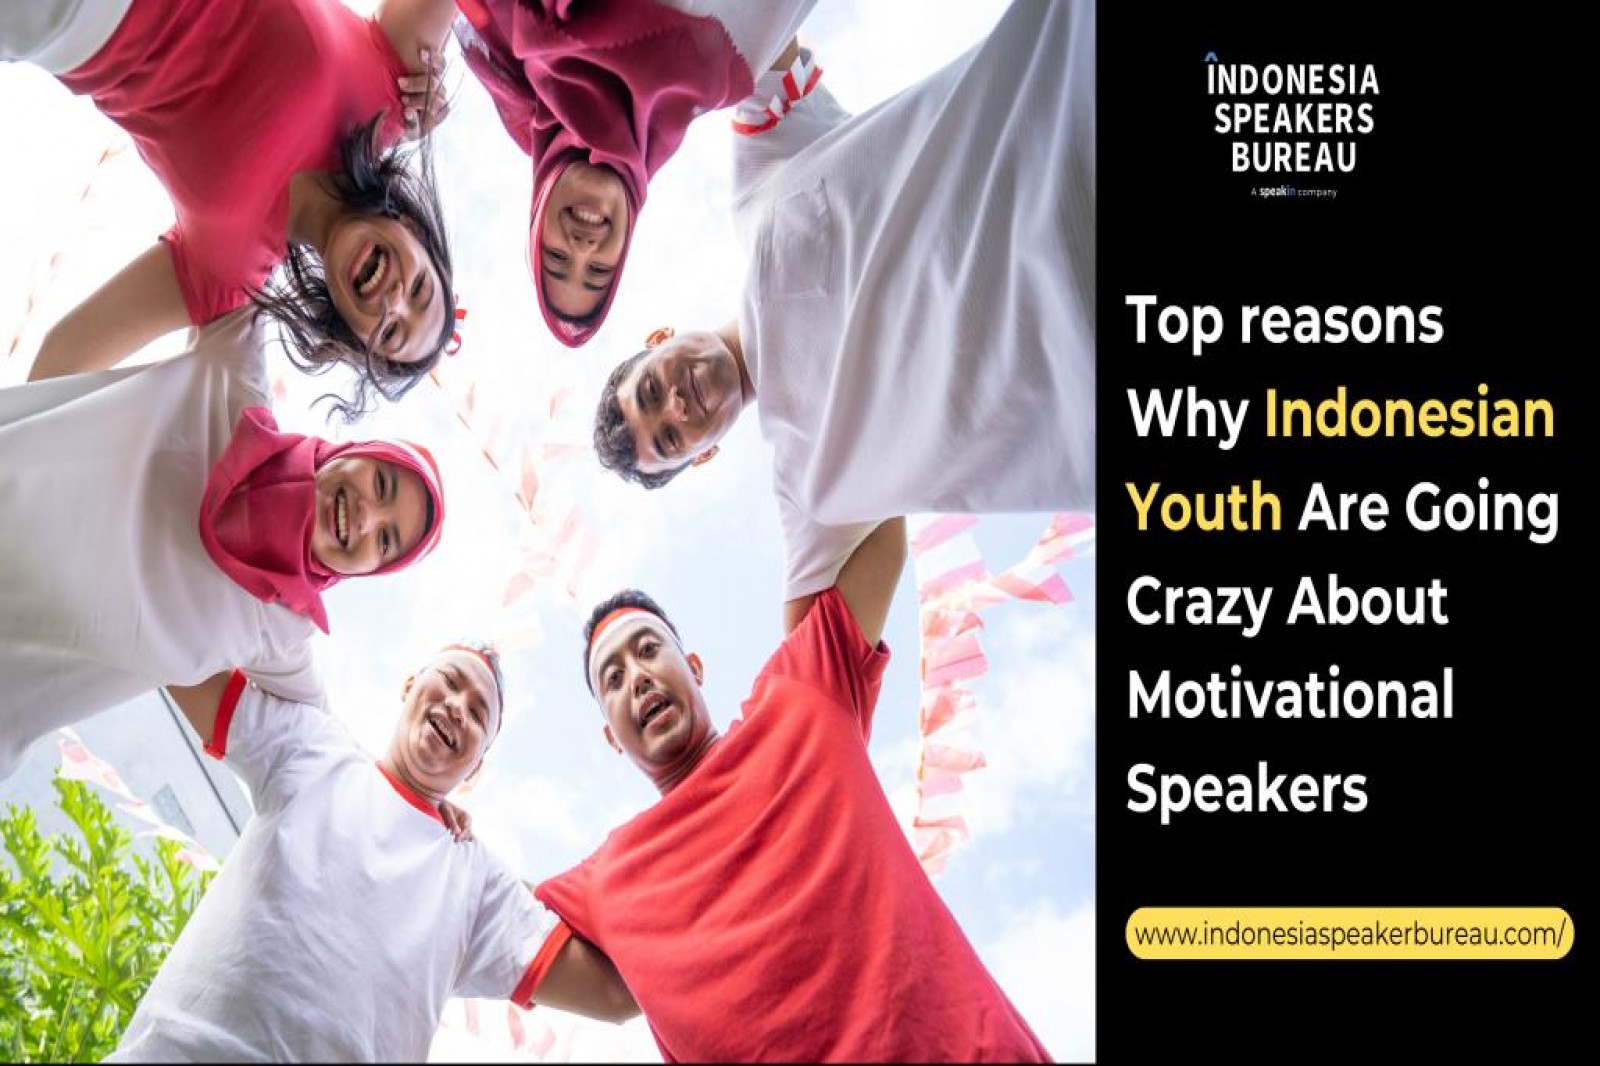 Top Reasons Why There Is A New Found Love For Motivational Speakers among Indonesian Youth